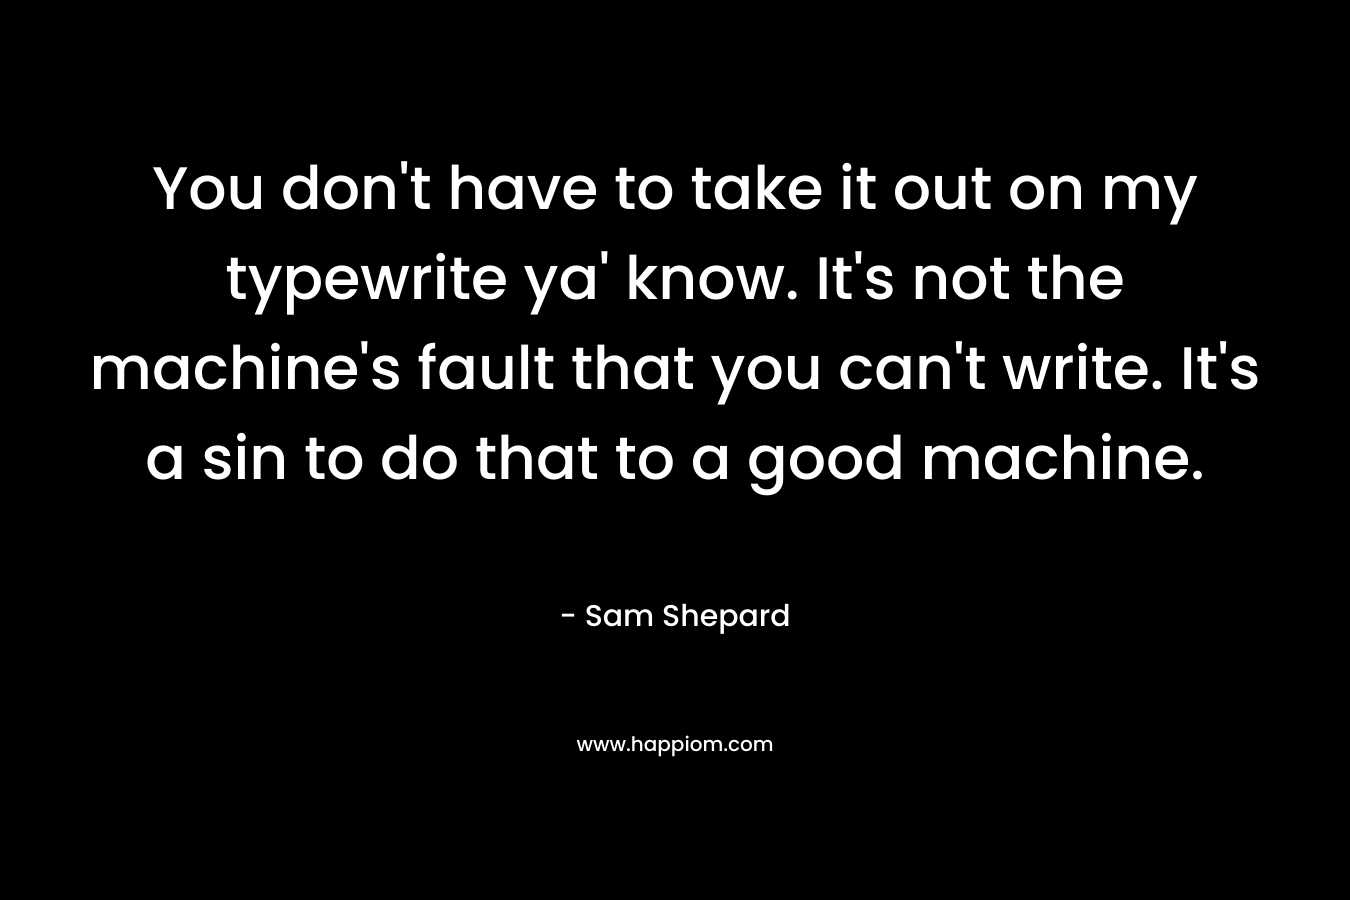 You don’t have to take it out on my typewrite ya’ know. It’s not the machine’s fault that you can’t write. It’s a sin to do that to a good machine. – Sam Shepard